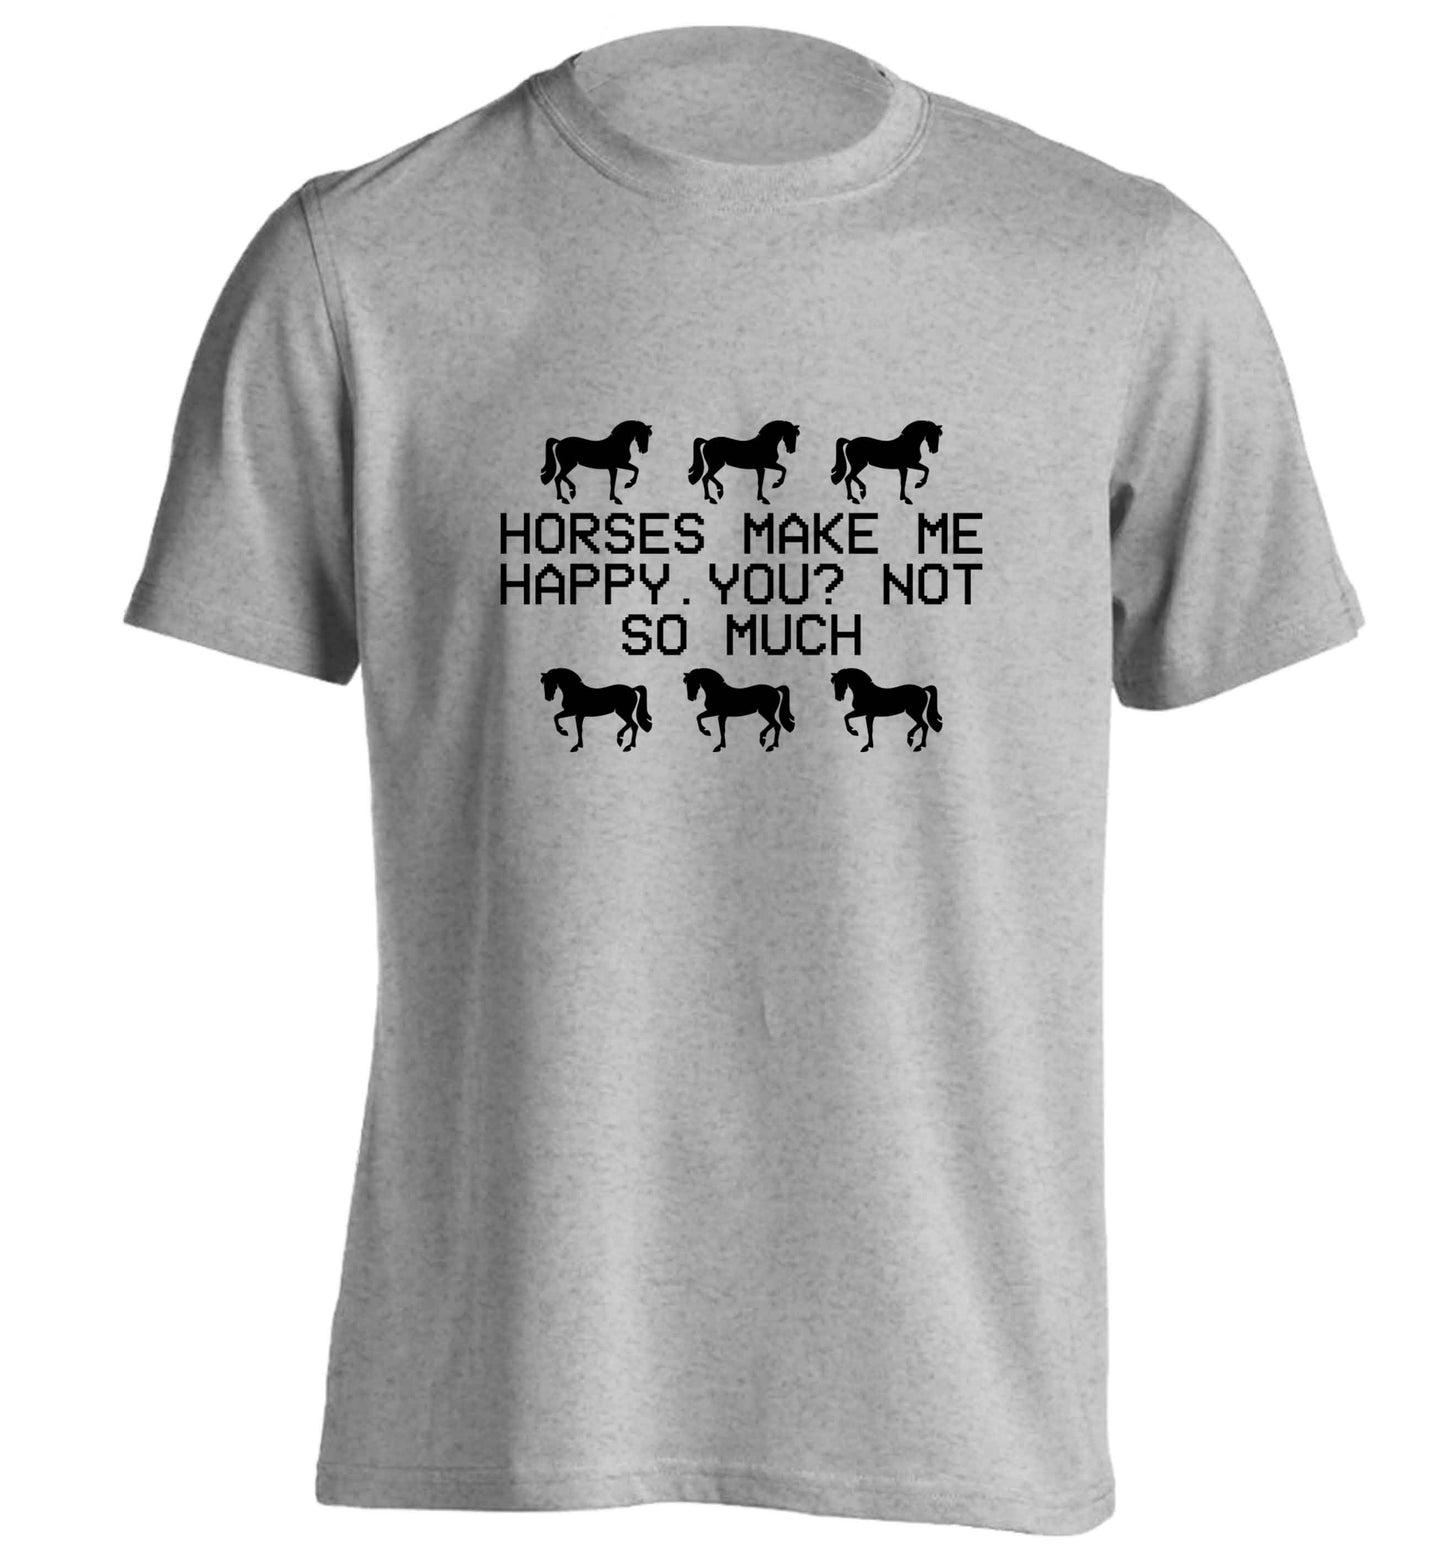 Horses make me happy, you not so much adults unisex grey Tshirt 2XL